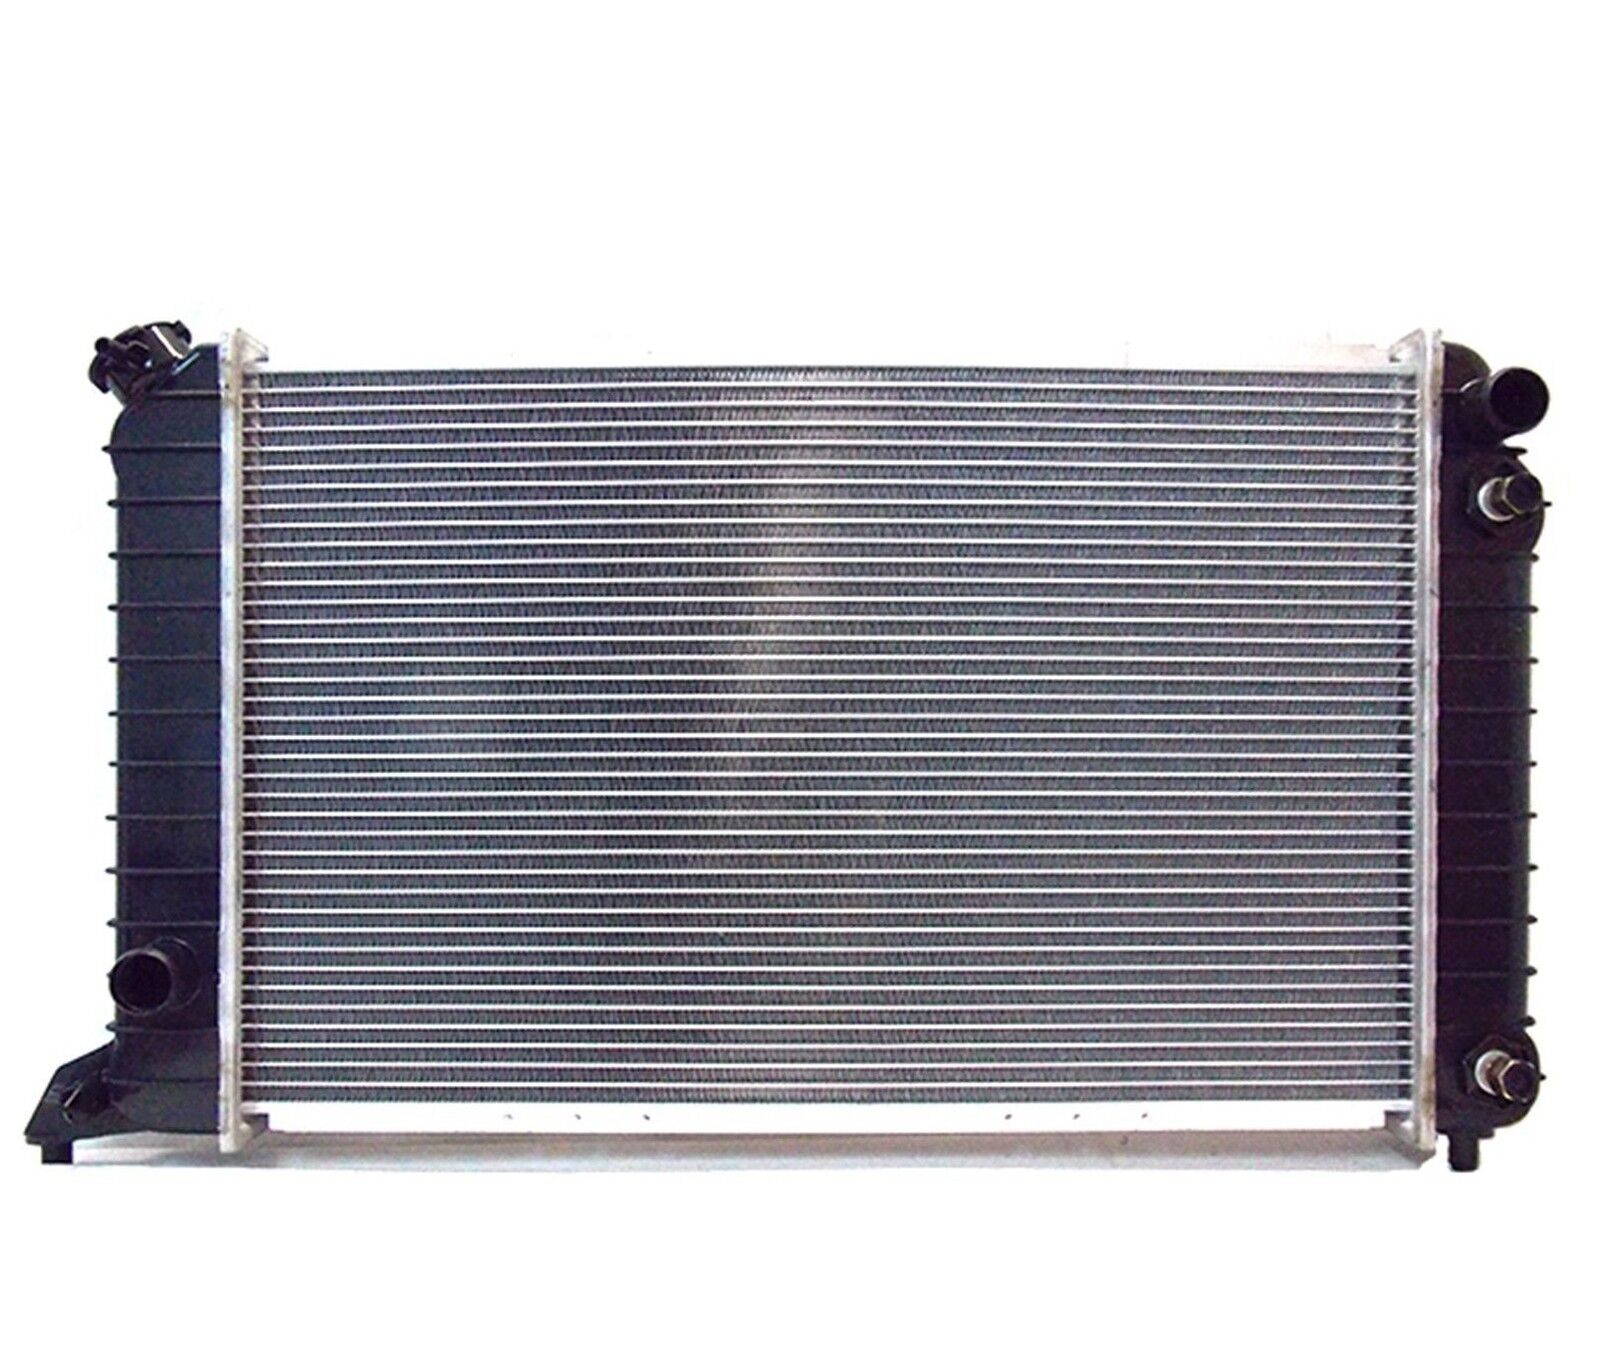 RADIATOR 2261 For 1994-2003 CHEVROLET PICKUP S10 SONOMA 2.2 4CYL ONLY